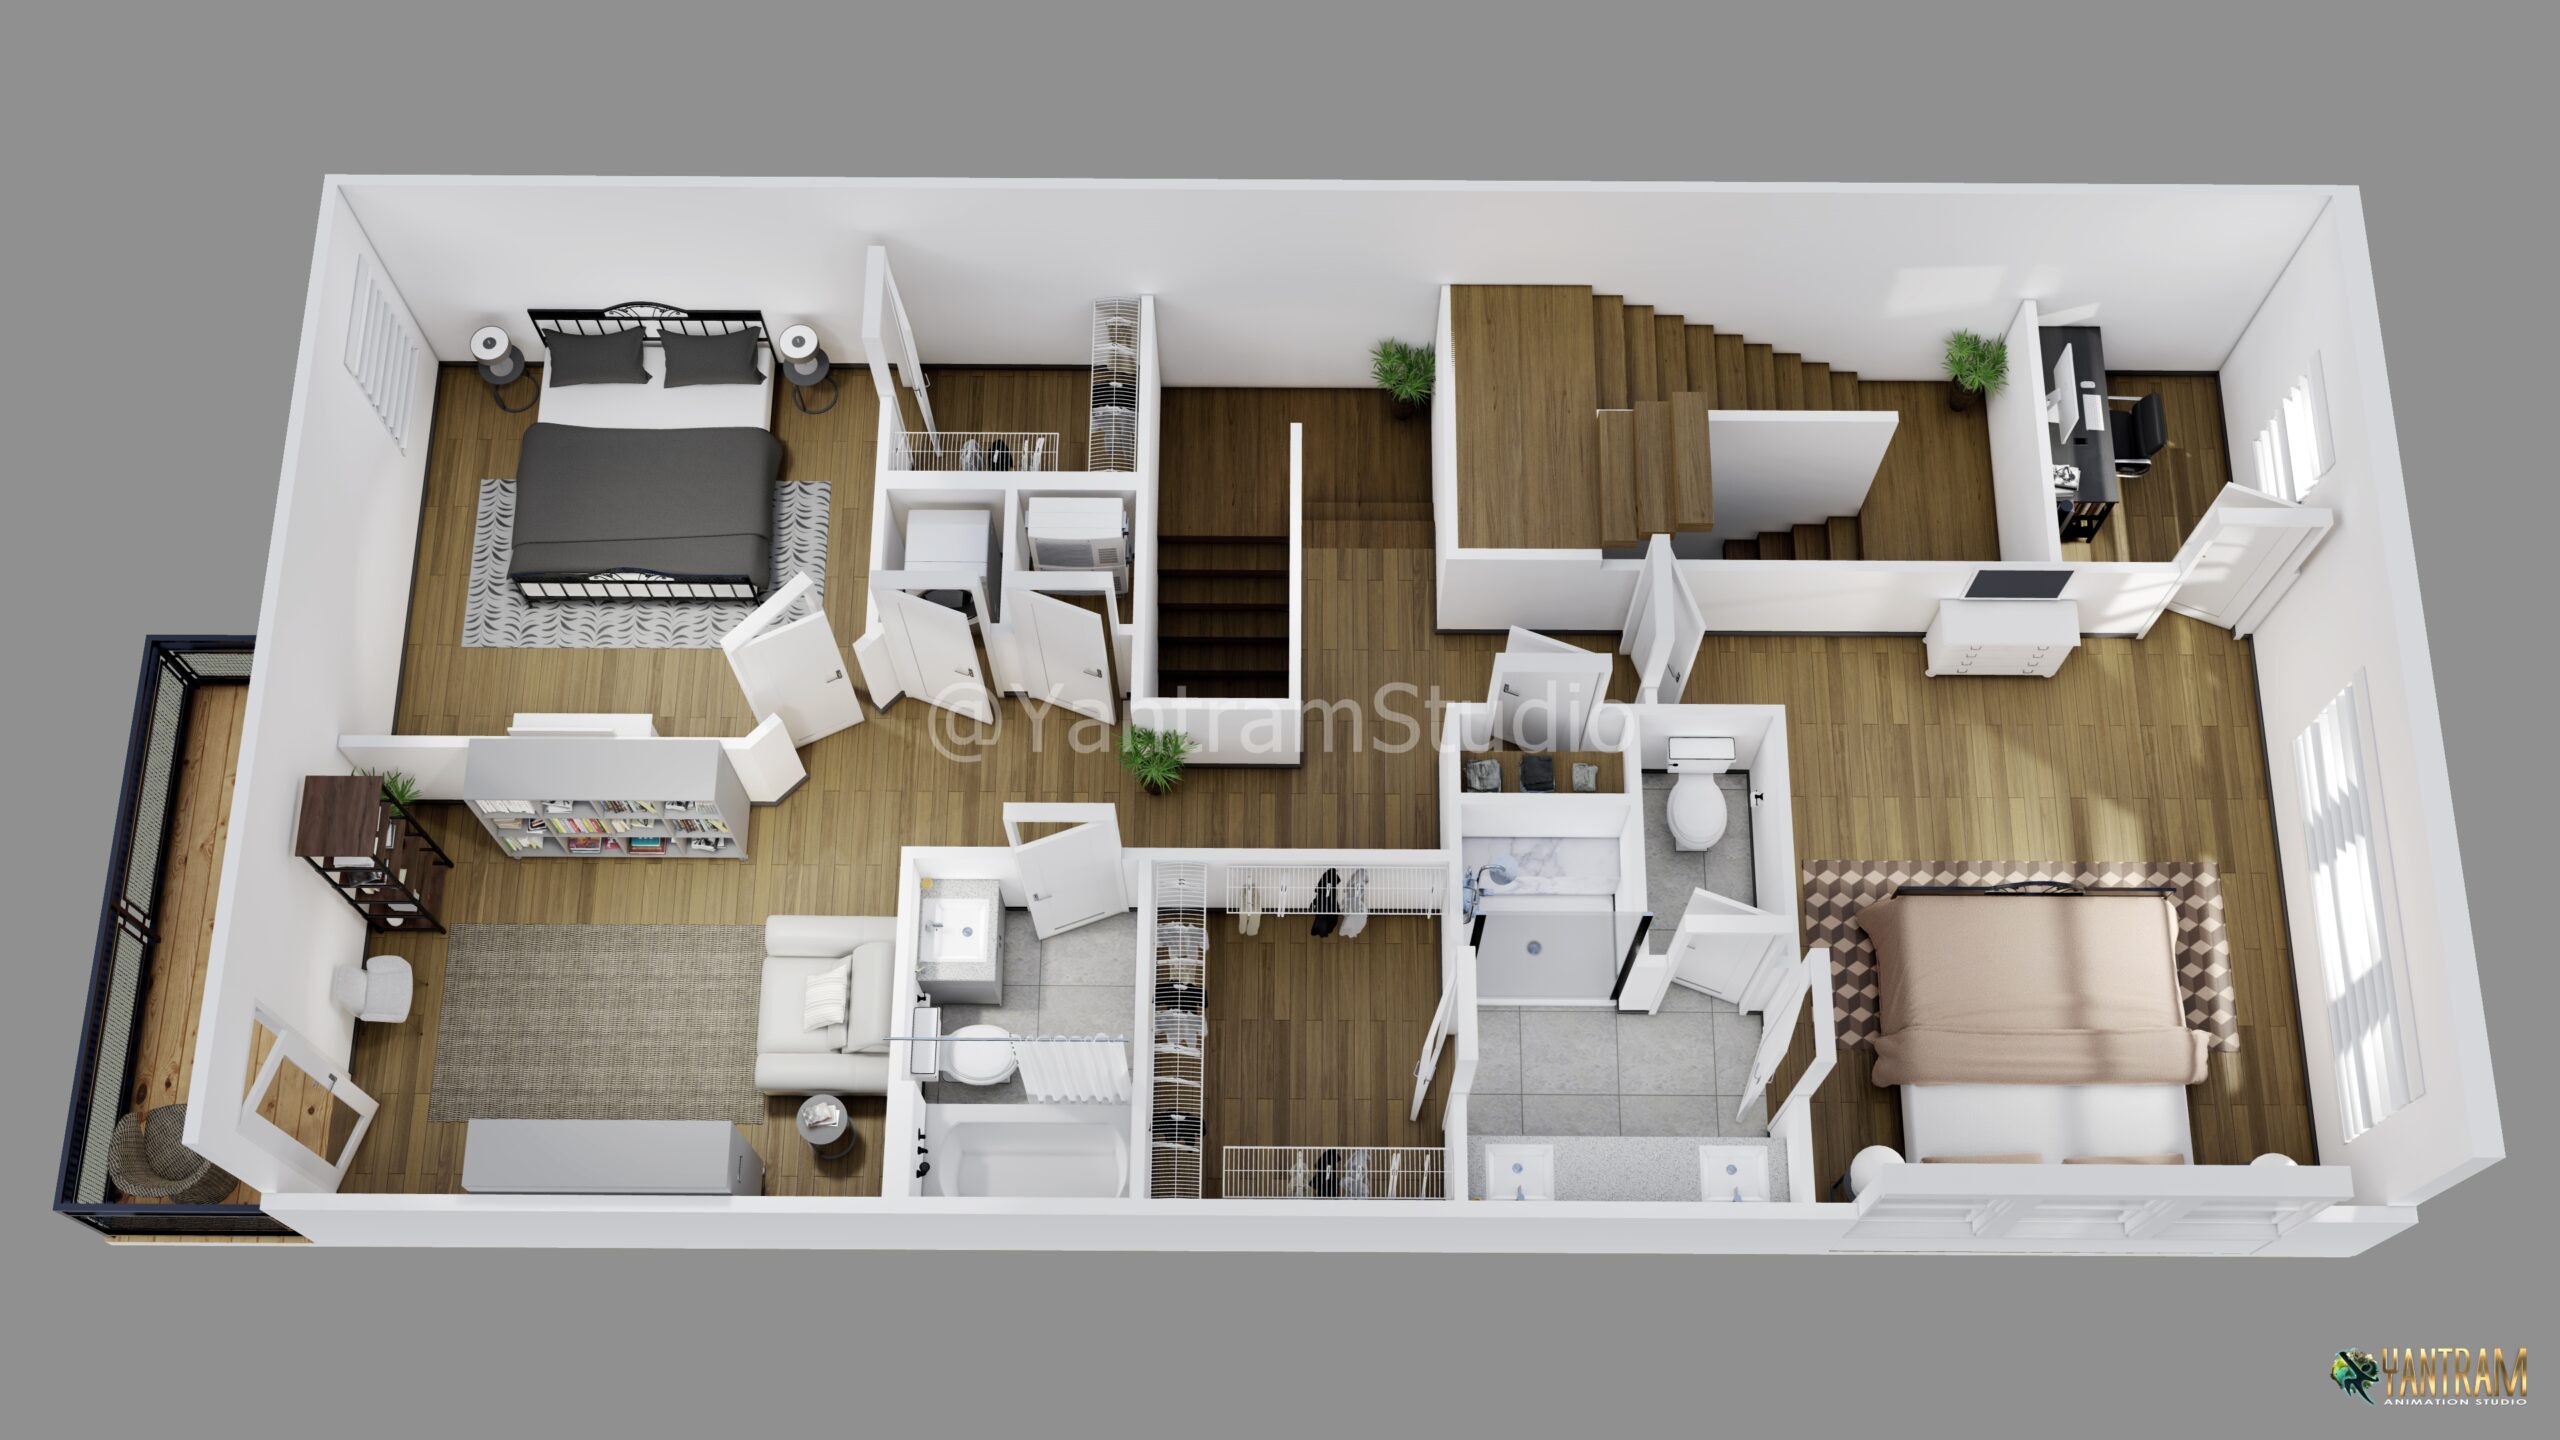 Visualize Your Dream Home with Our 3D Floor Plan Design Services: Leading 3D Architectural Rendering Studio in Casa Grande, Arizona